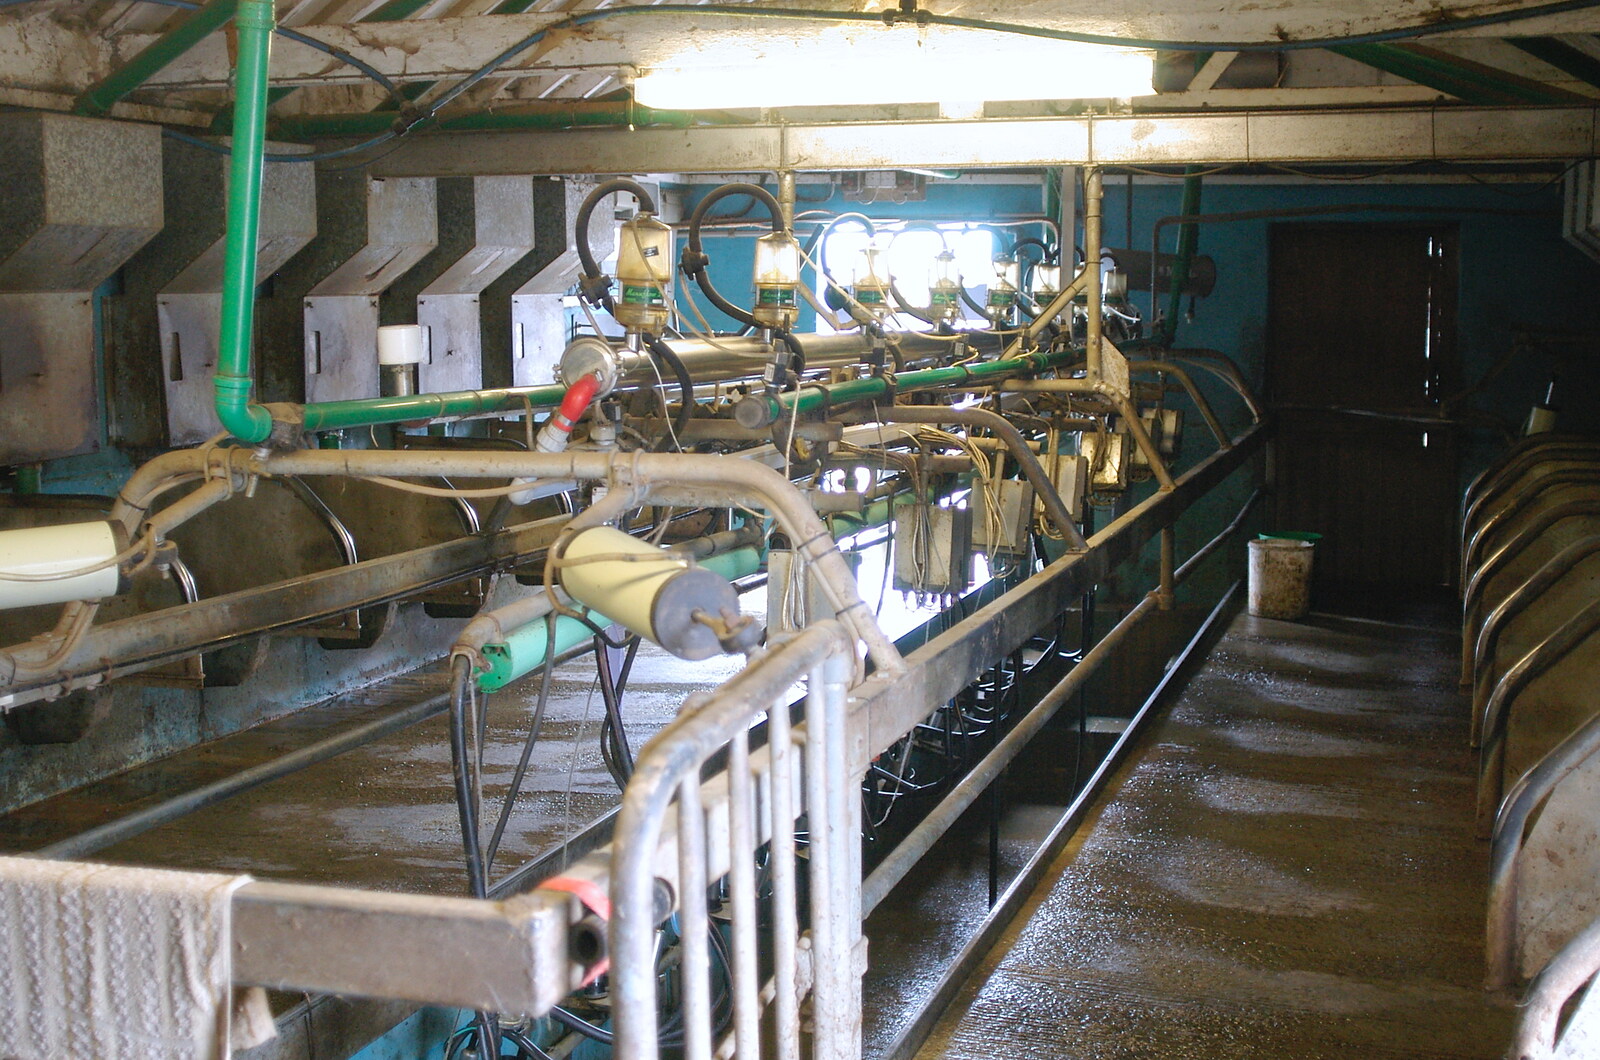 Dairy Farm's milking shed from Wavy and the Milking Room, Dairy Farm, Thrandeston, Suffolk - 28th March 2005